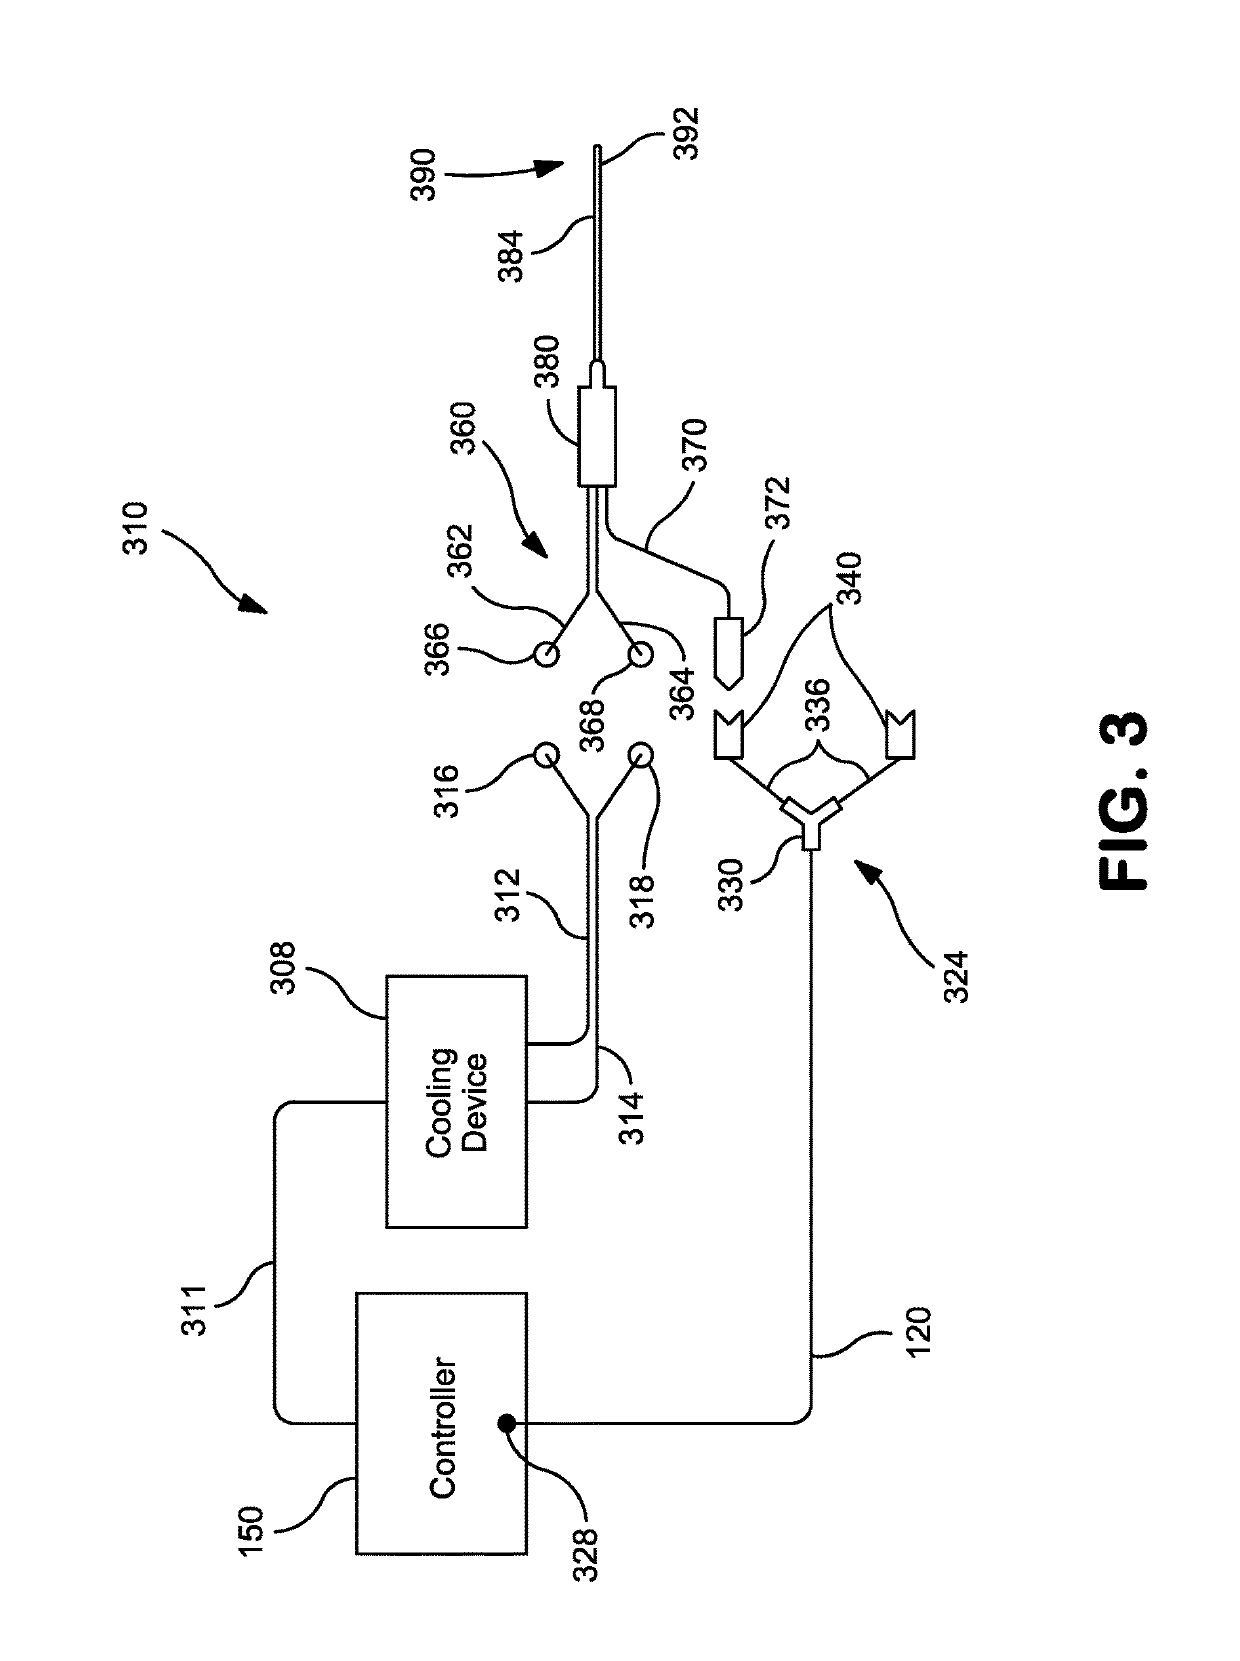 Method and system for identification of source of chronic pain and treatment